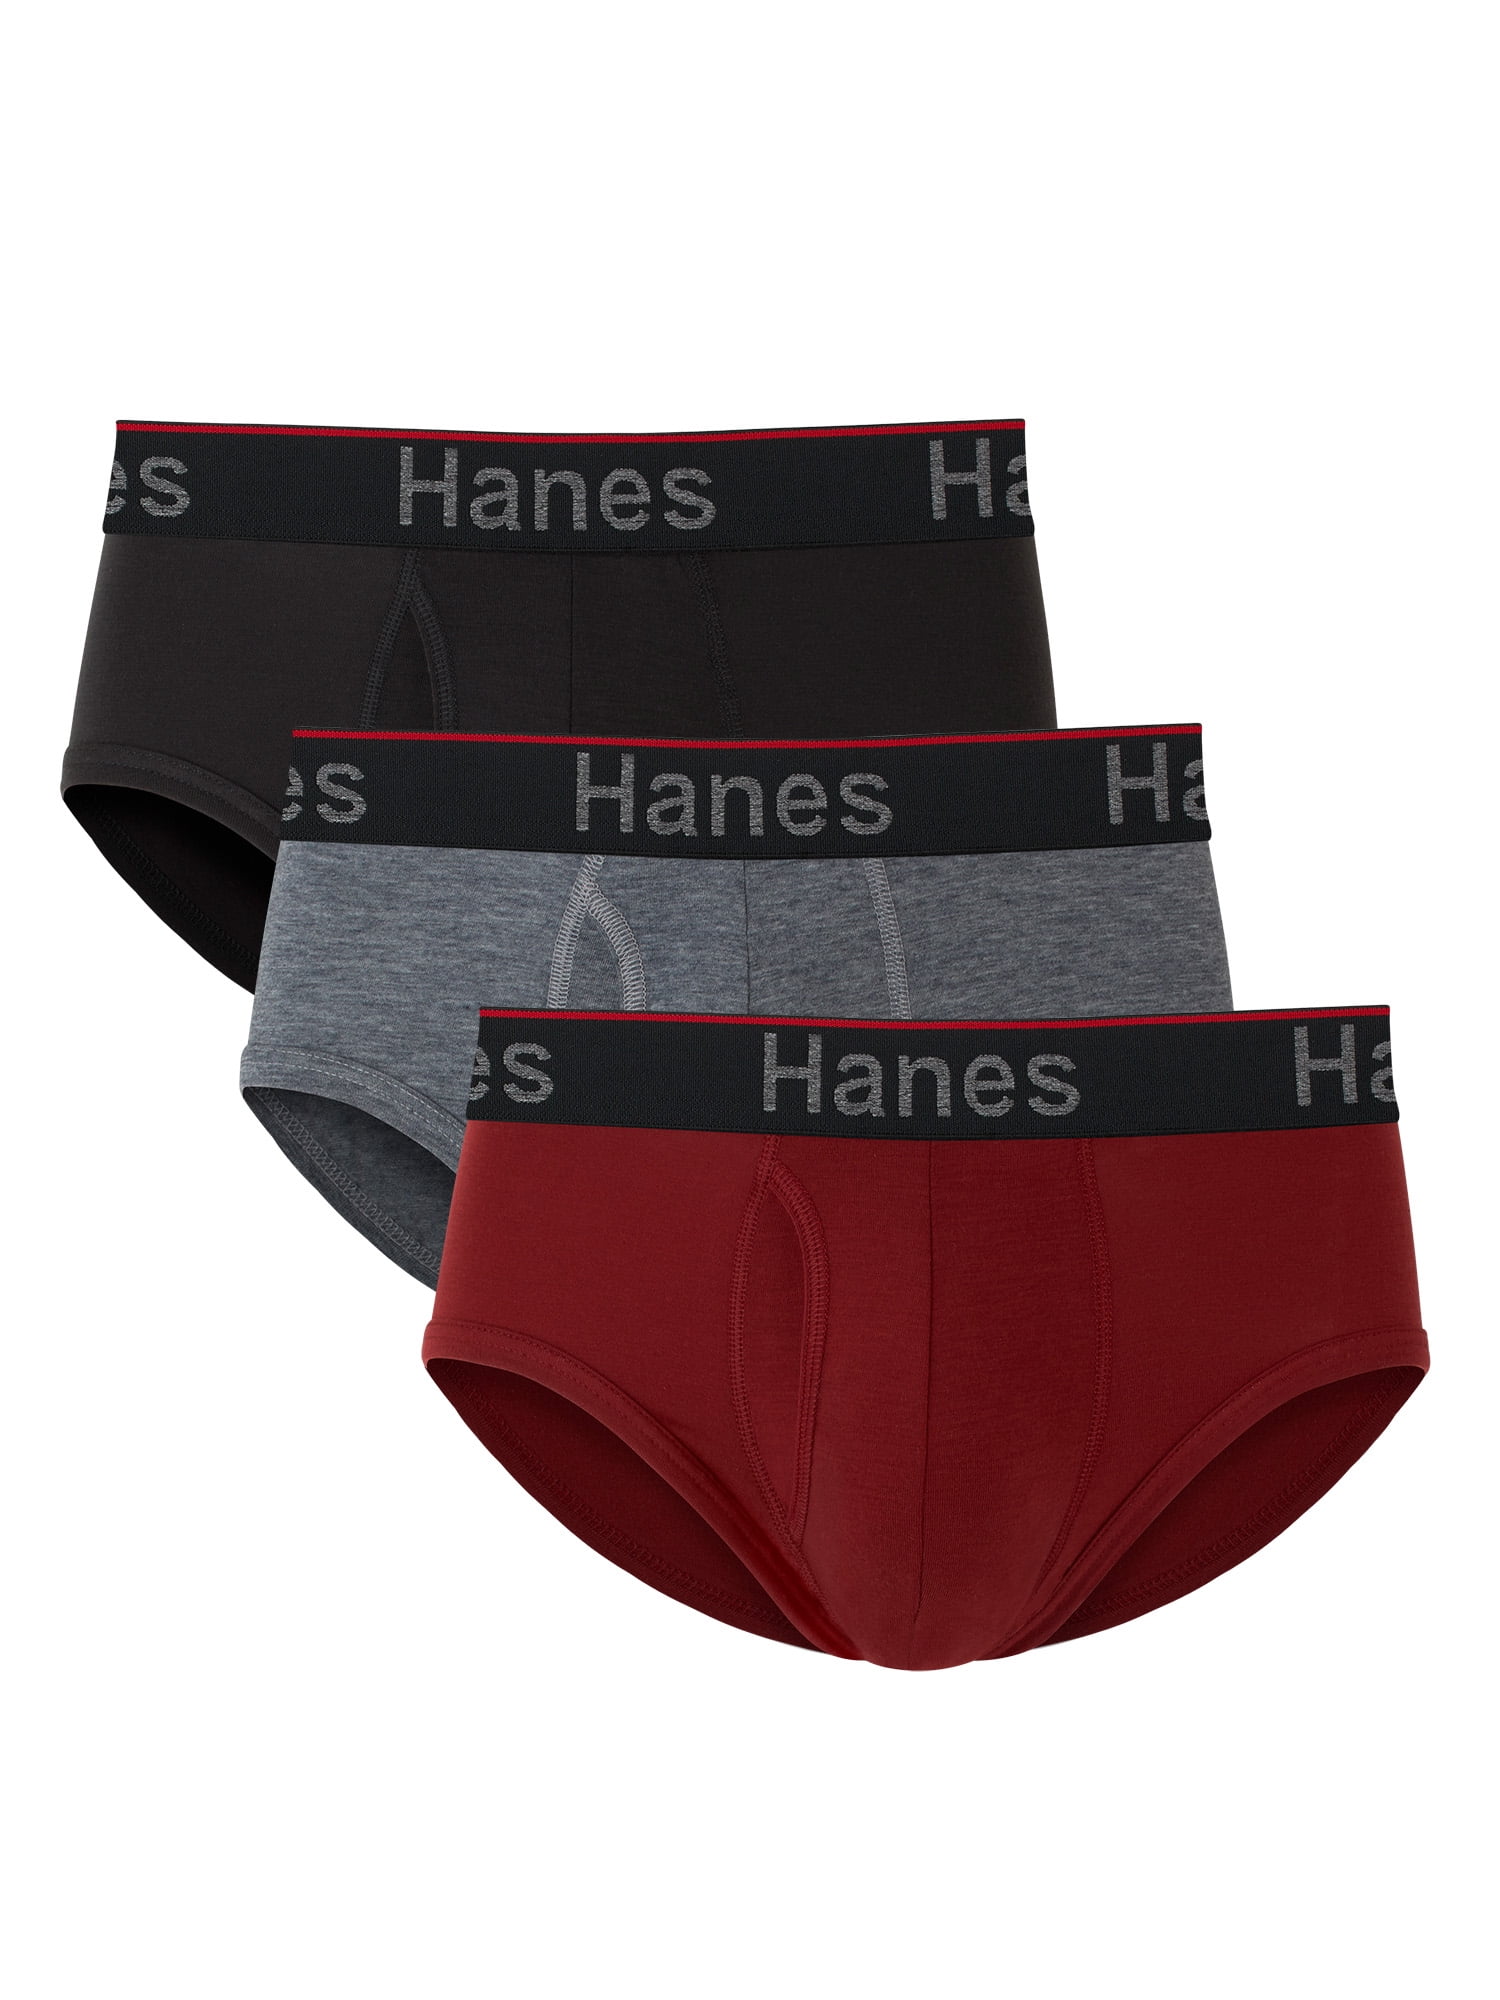 Wholesale OVERSTOCK Mens HANES Comfort Flex Boxer Briefs ~ 3 Sizes to Pick  From! M or L/XL or XL ONLY #27277c #27278c #27279c